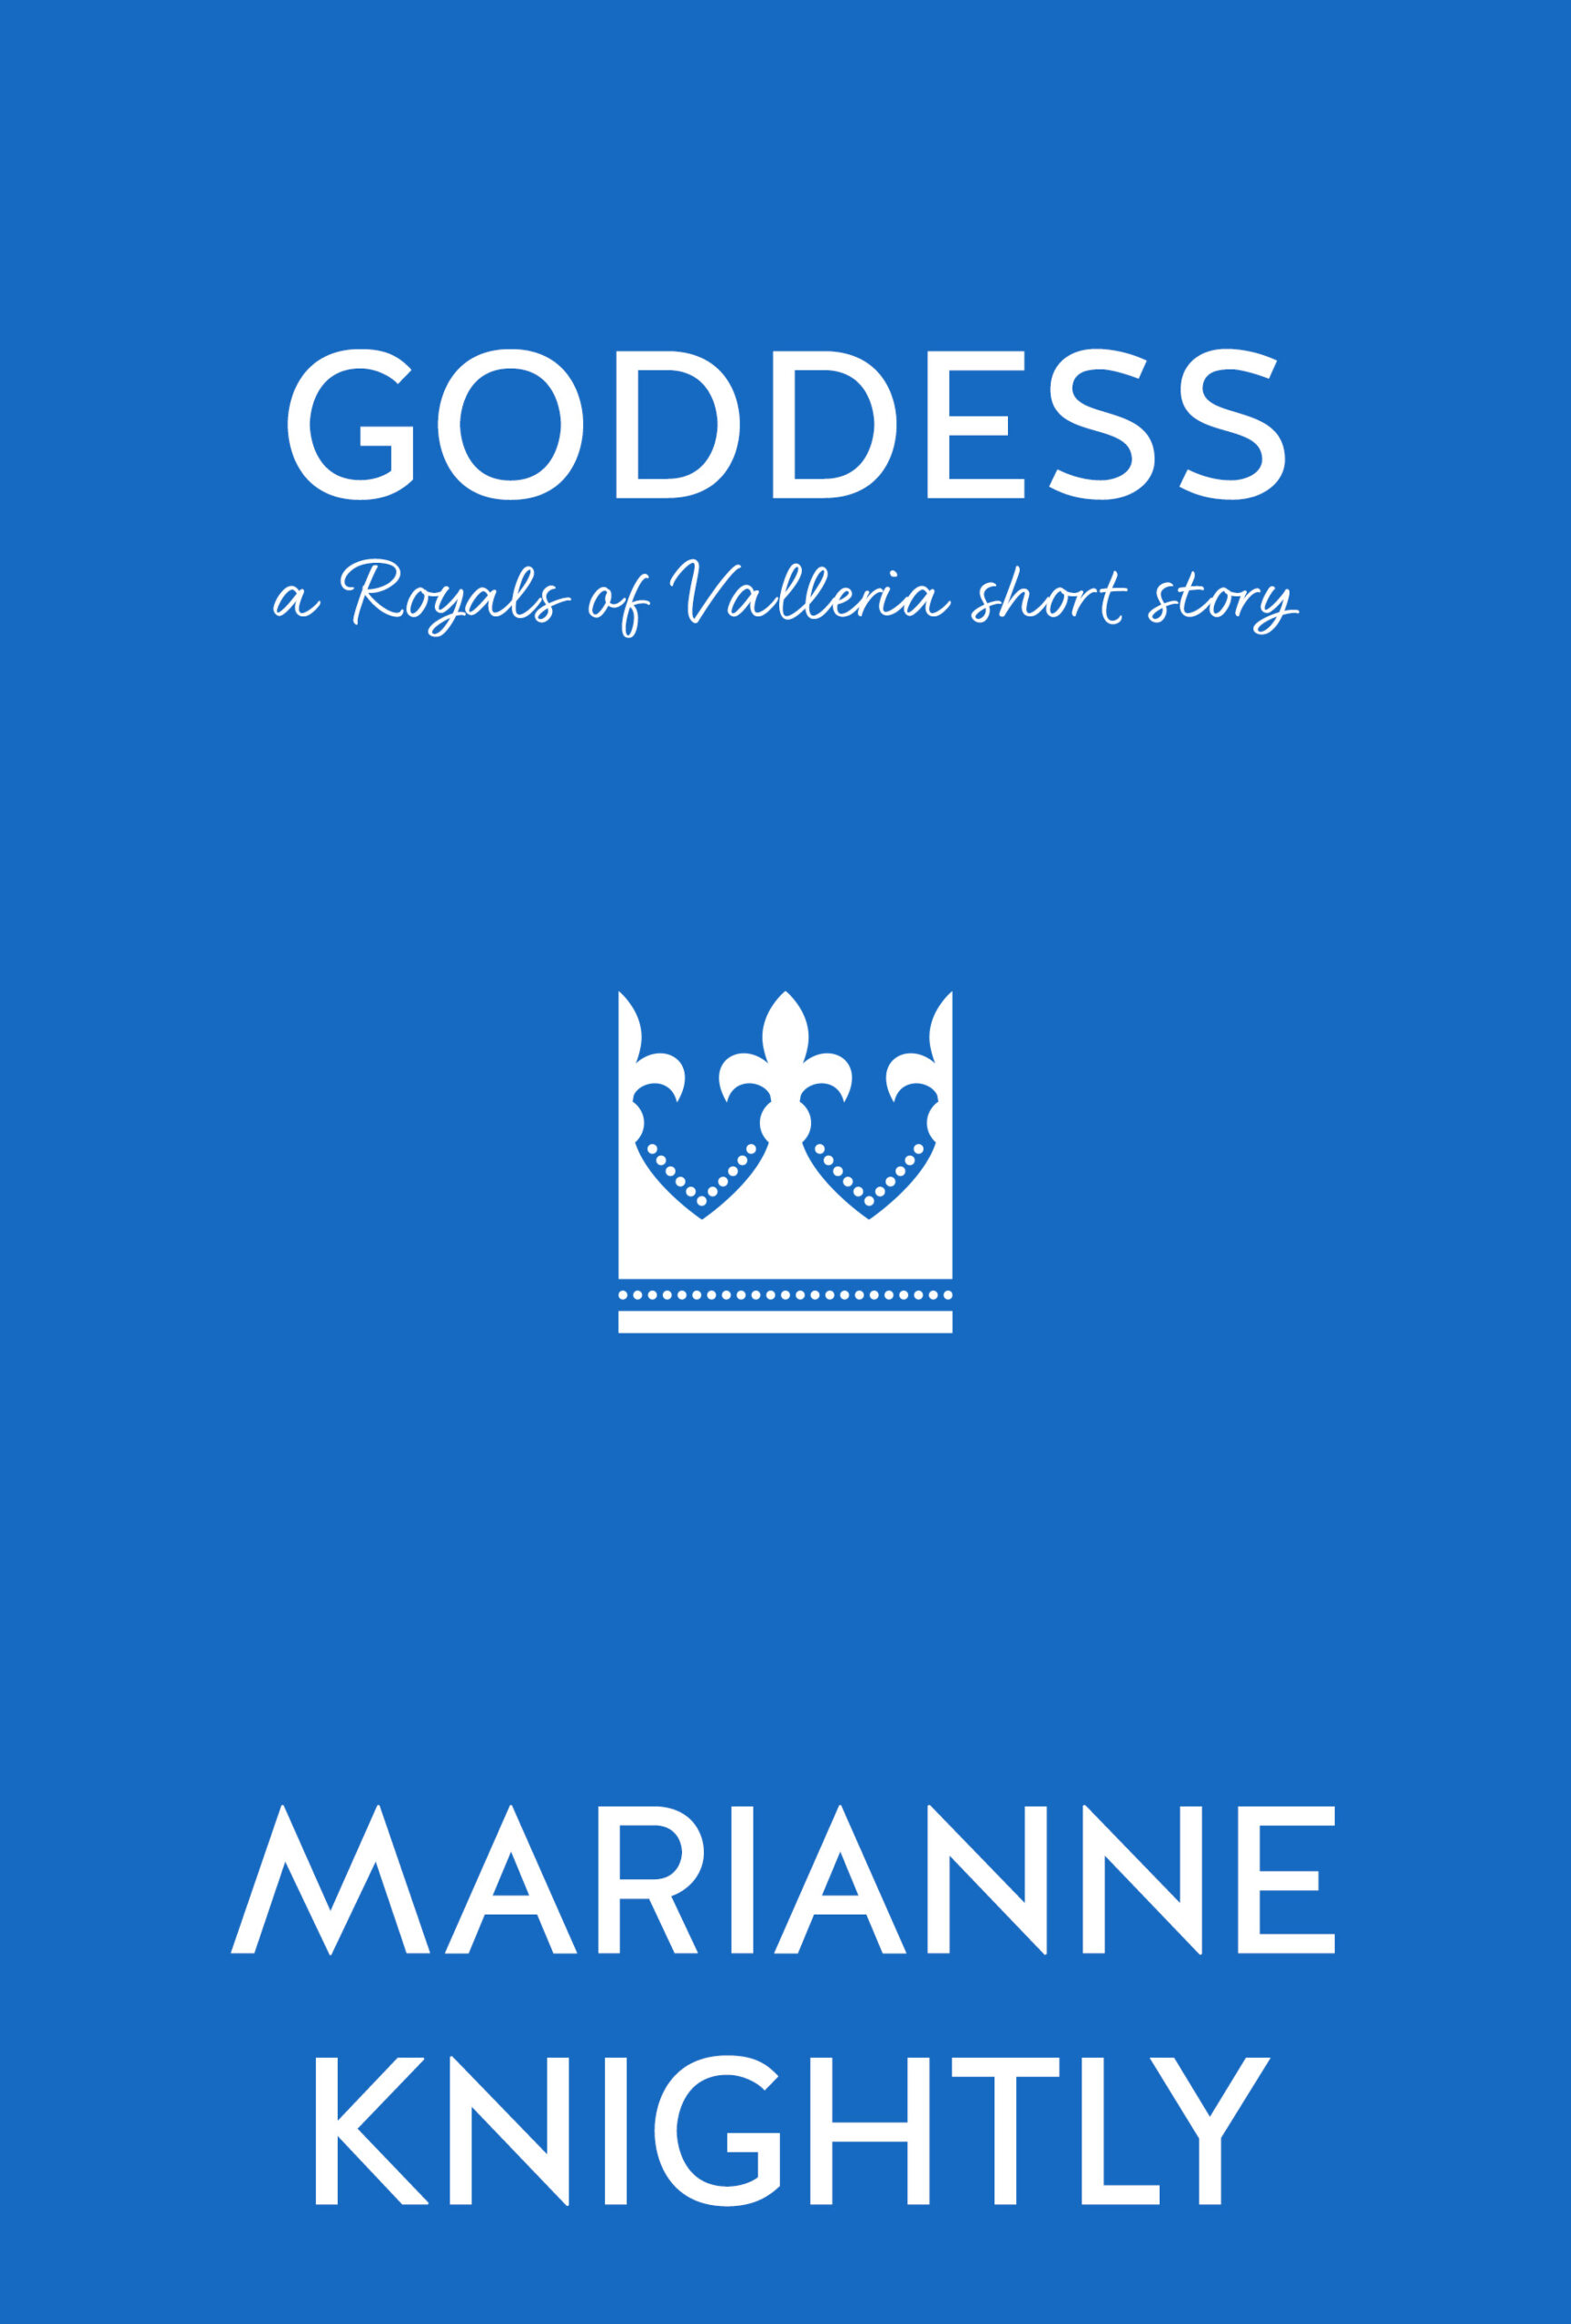 Goddess - A Royals Short Story by Marianne Knightly